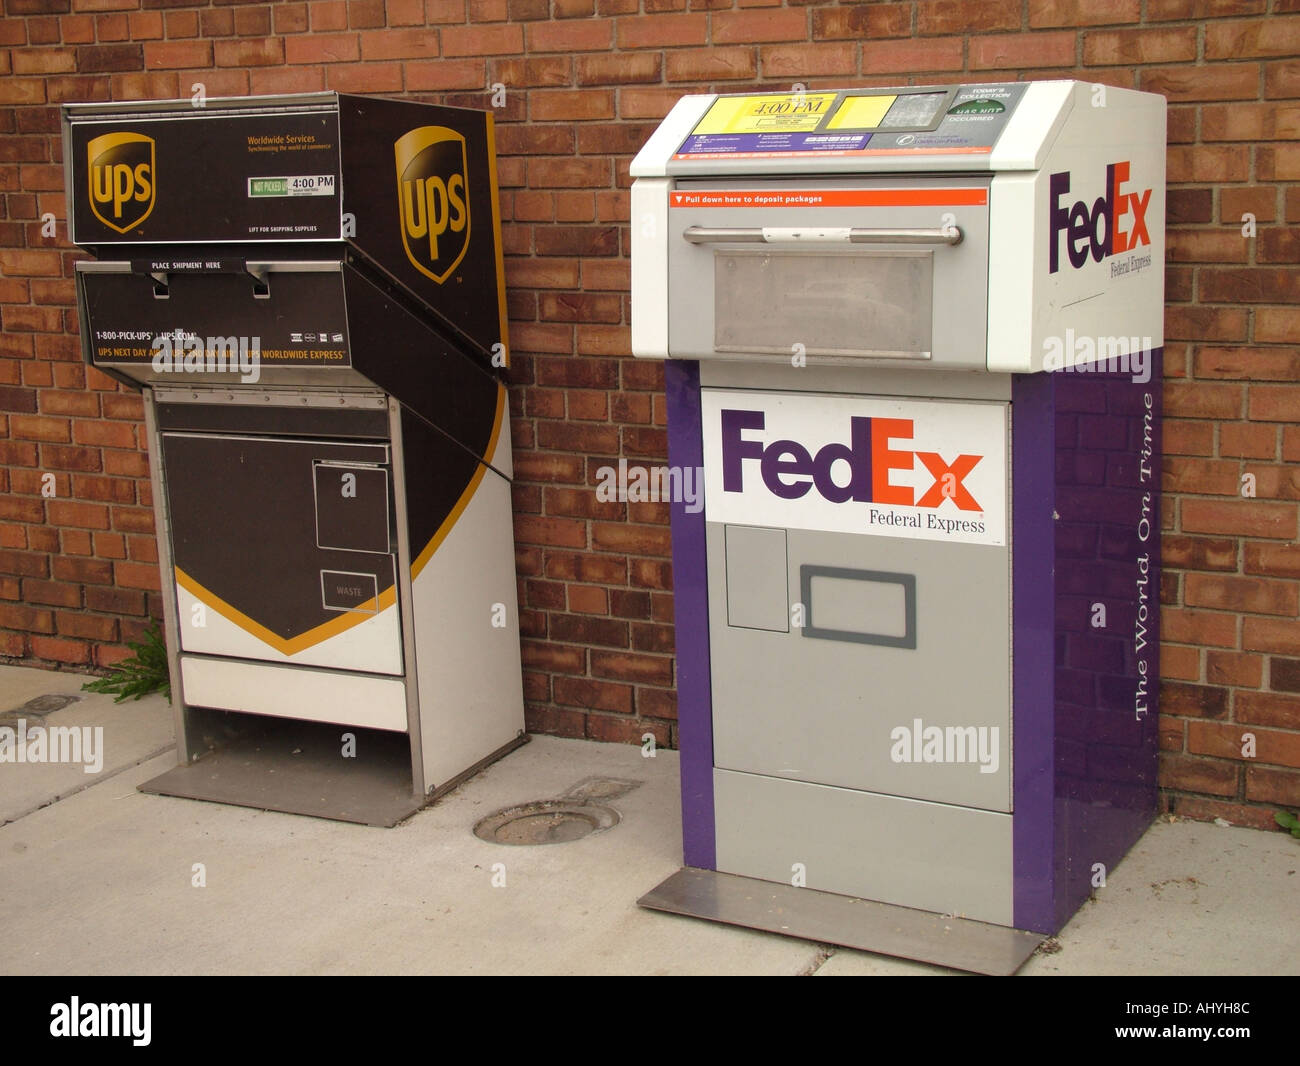 AJD45857, FeEx and UPS drop boxes, Federal Express, United Parcel Service Stock Photo